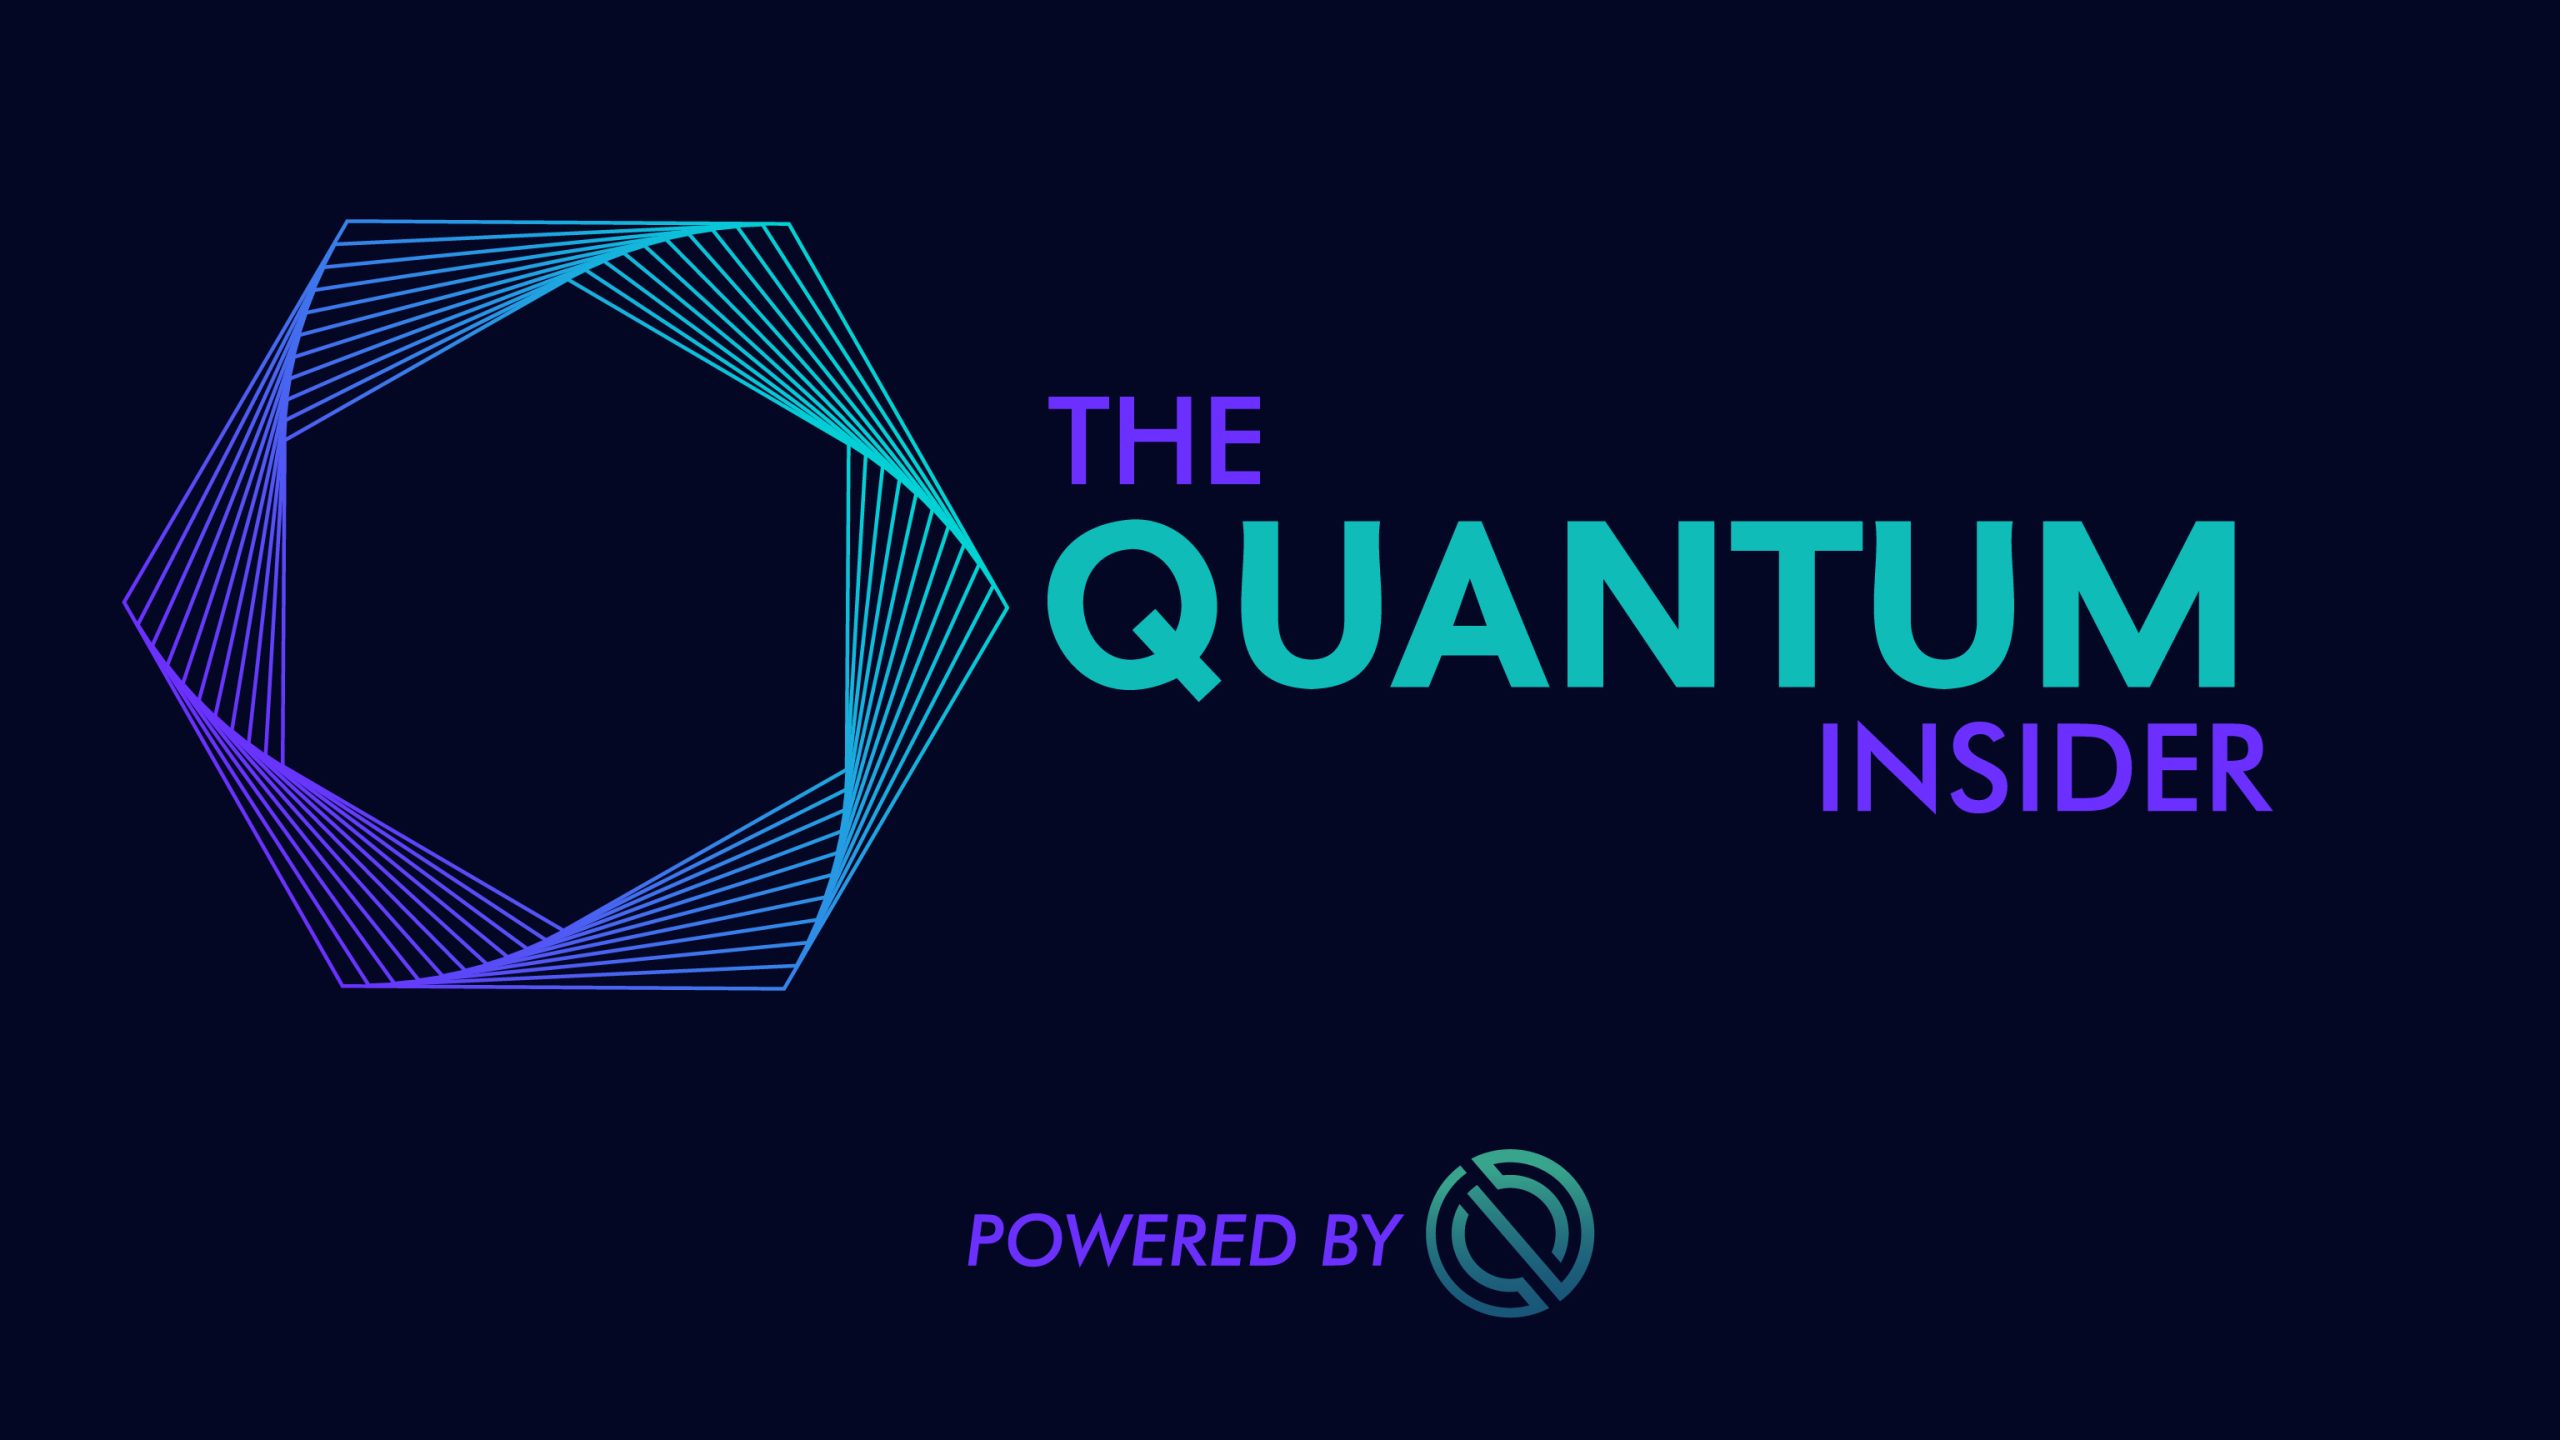 Dark background with light neon blue and purple logo for the Quantum Insider